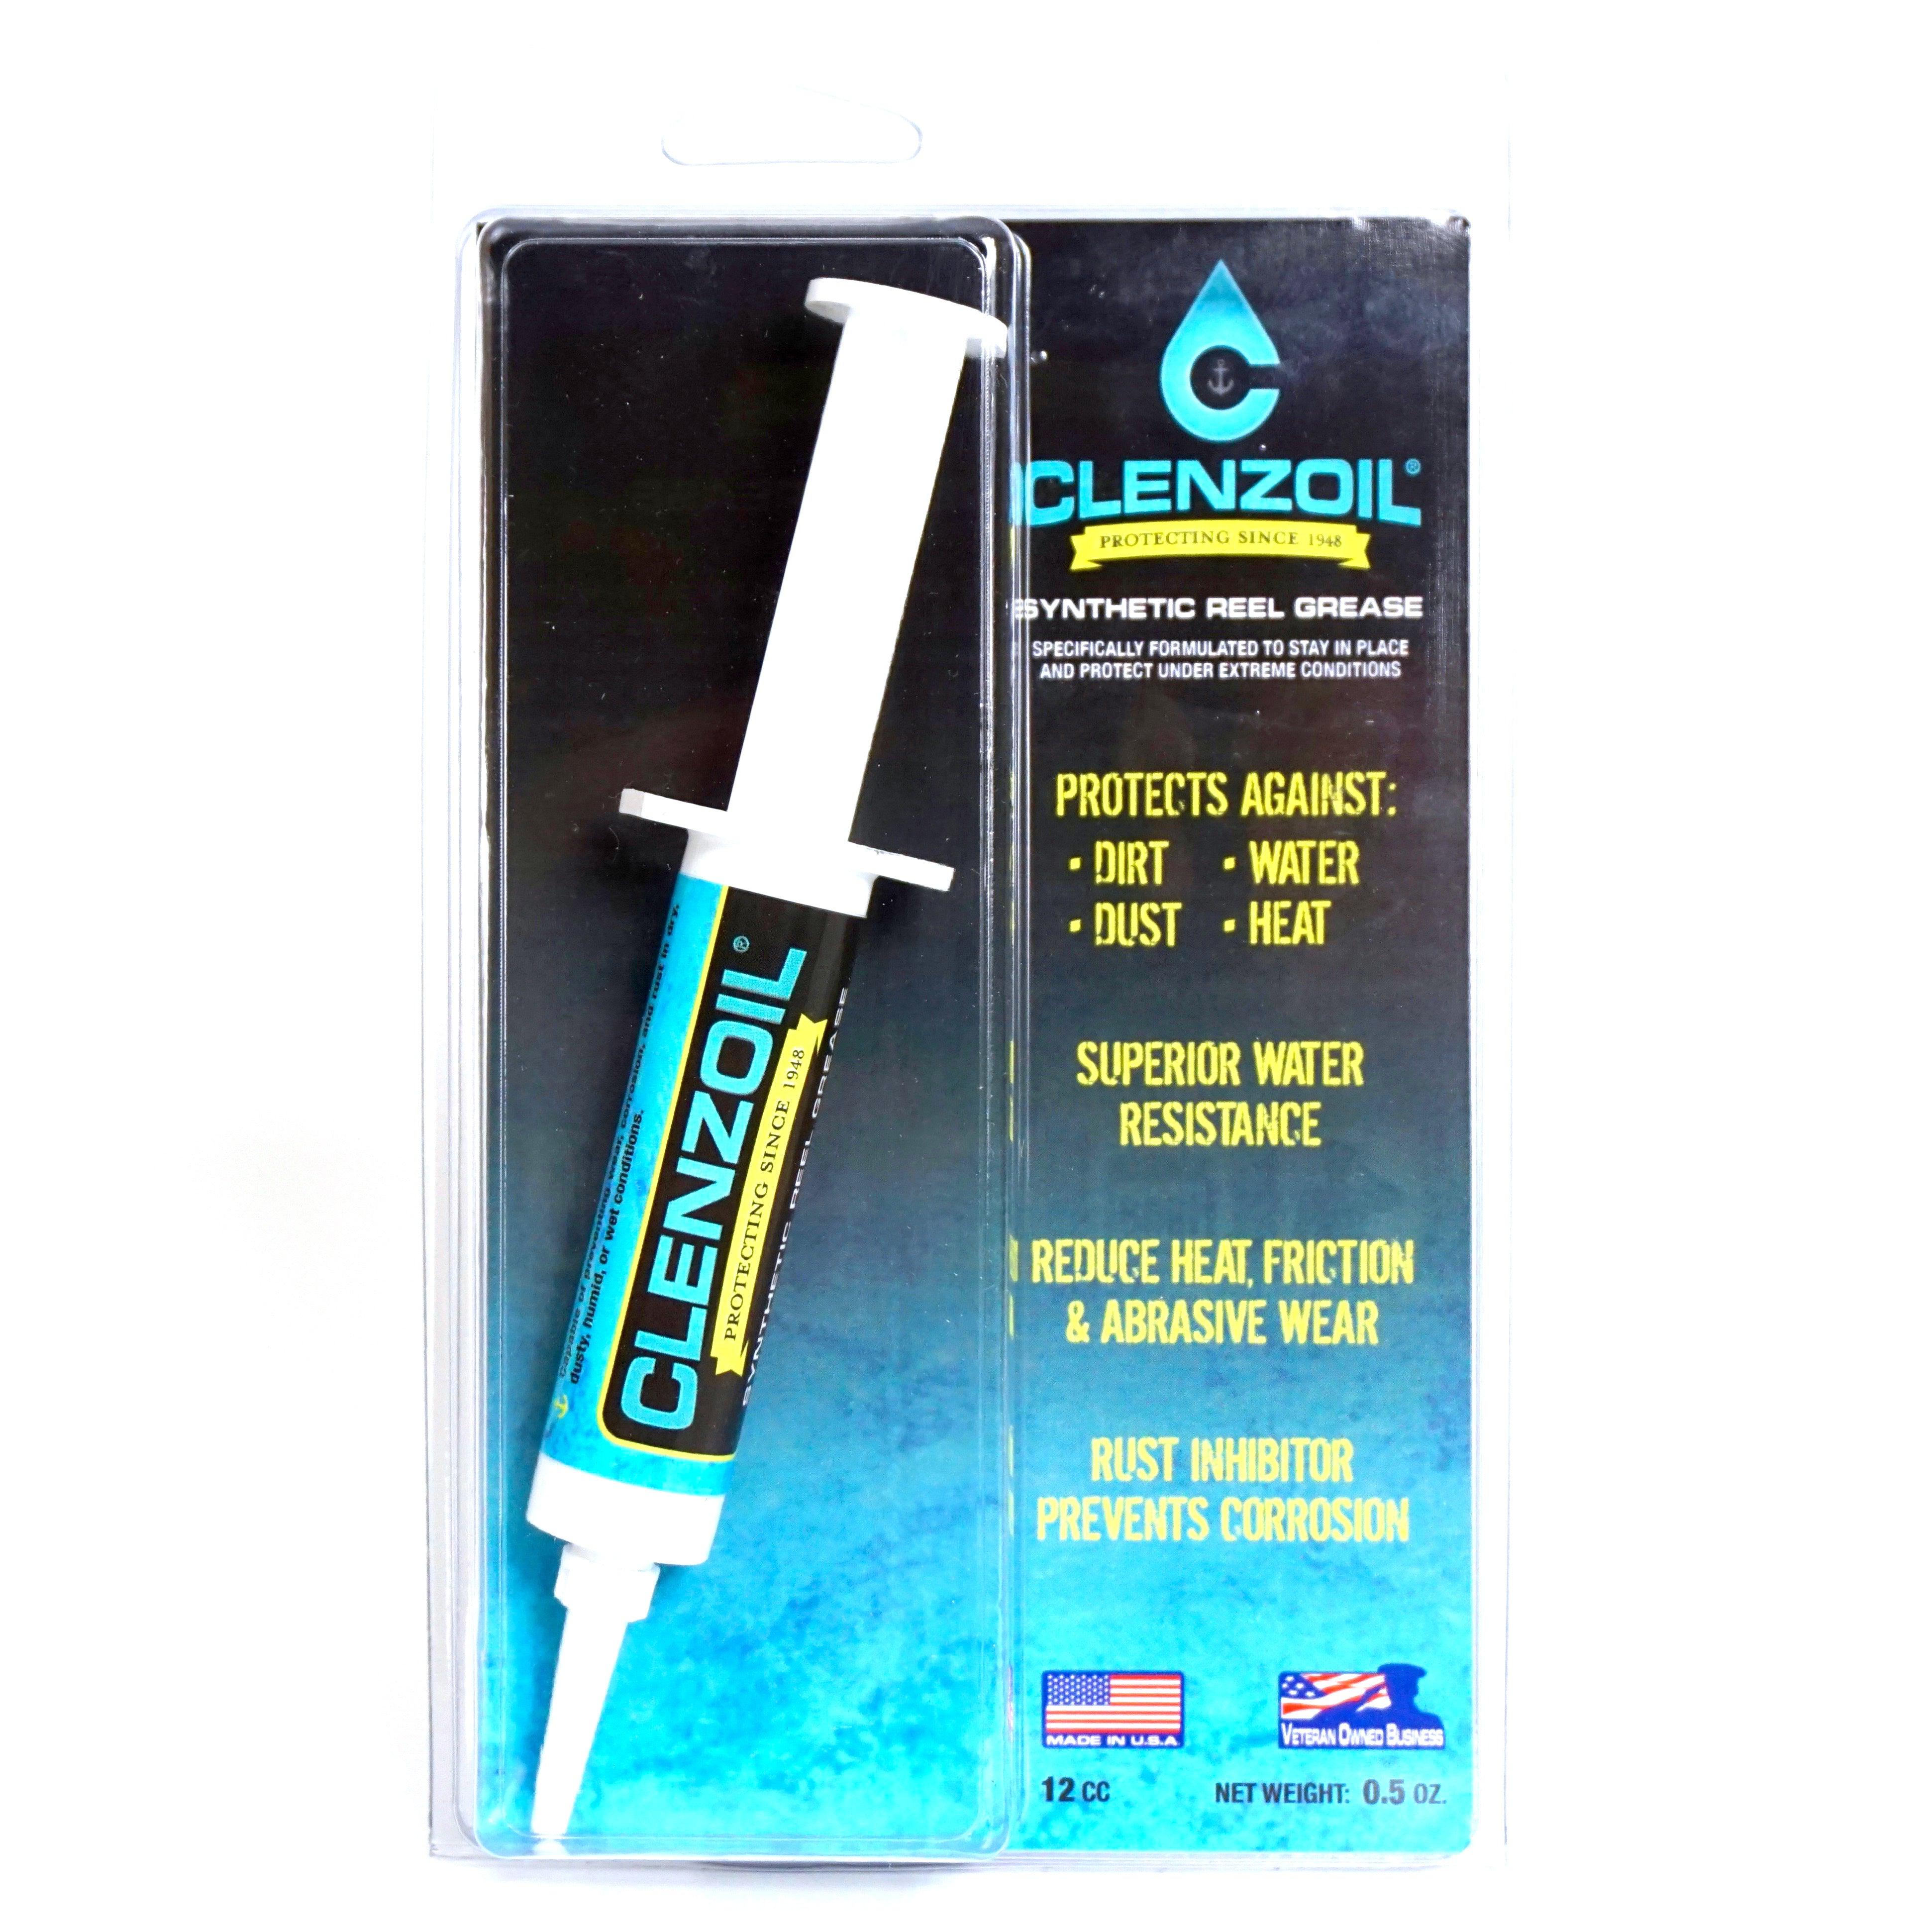 Synthetic Reel Grease Syringe - Clenzoil Unlimited